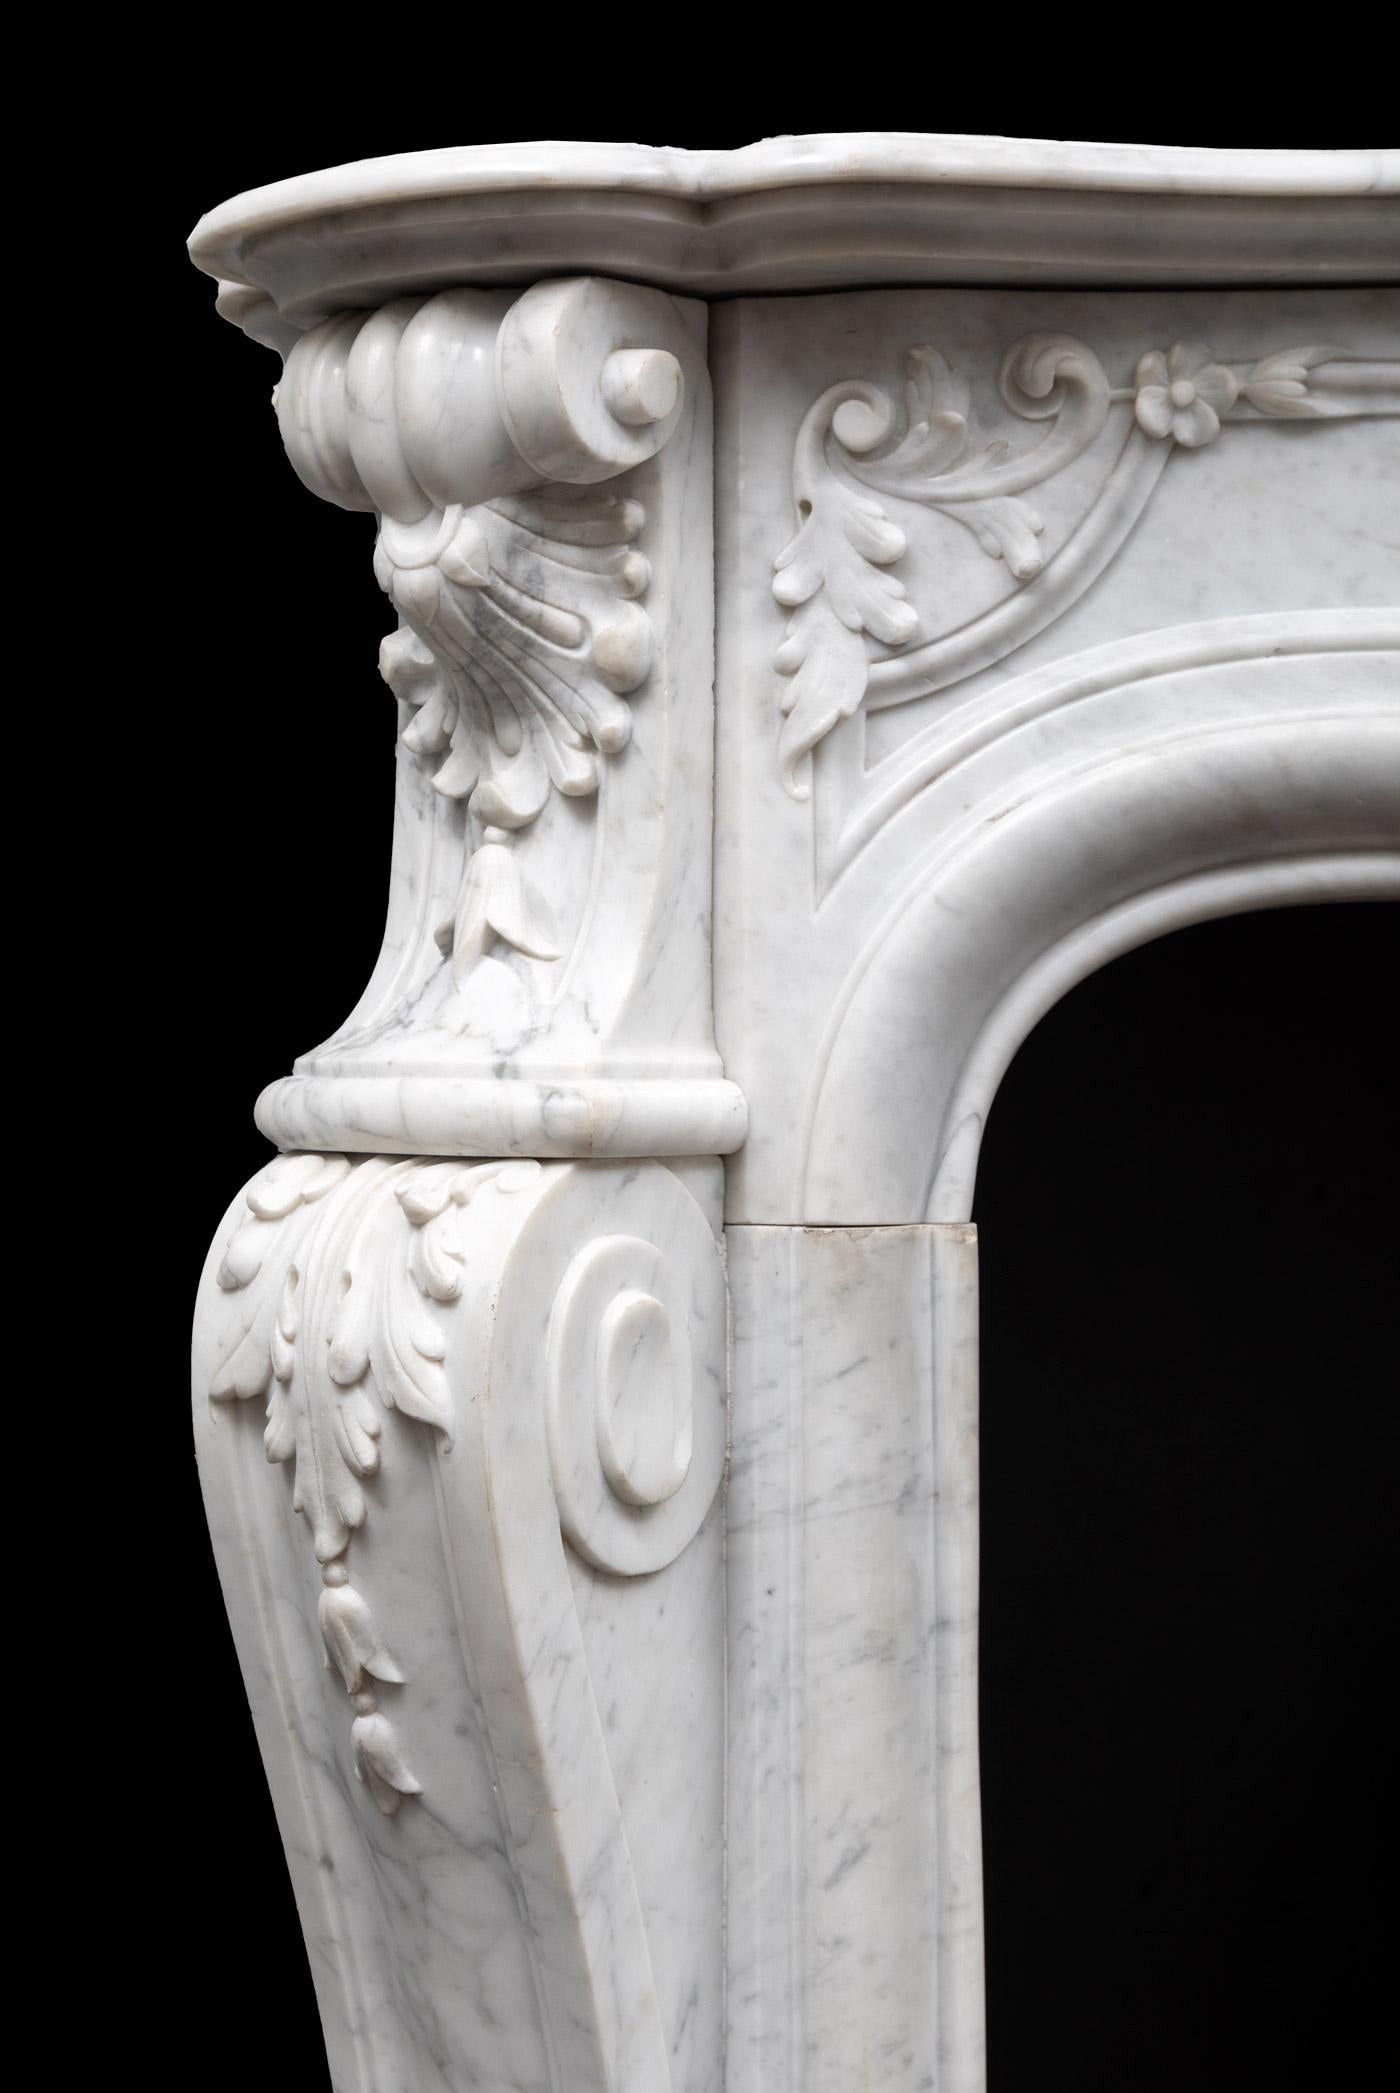 A stunning antique French Louis XV Rococo style fireplace carved from Carrara marble. The serpentine shaped panelled frieze is beautifully carved with flowers and foliage emanating from the central scallop shell cartouche. The splayed and carved